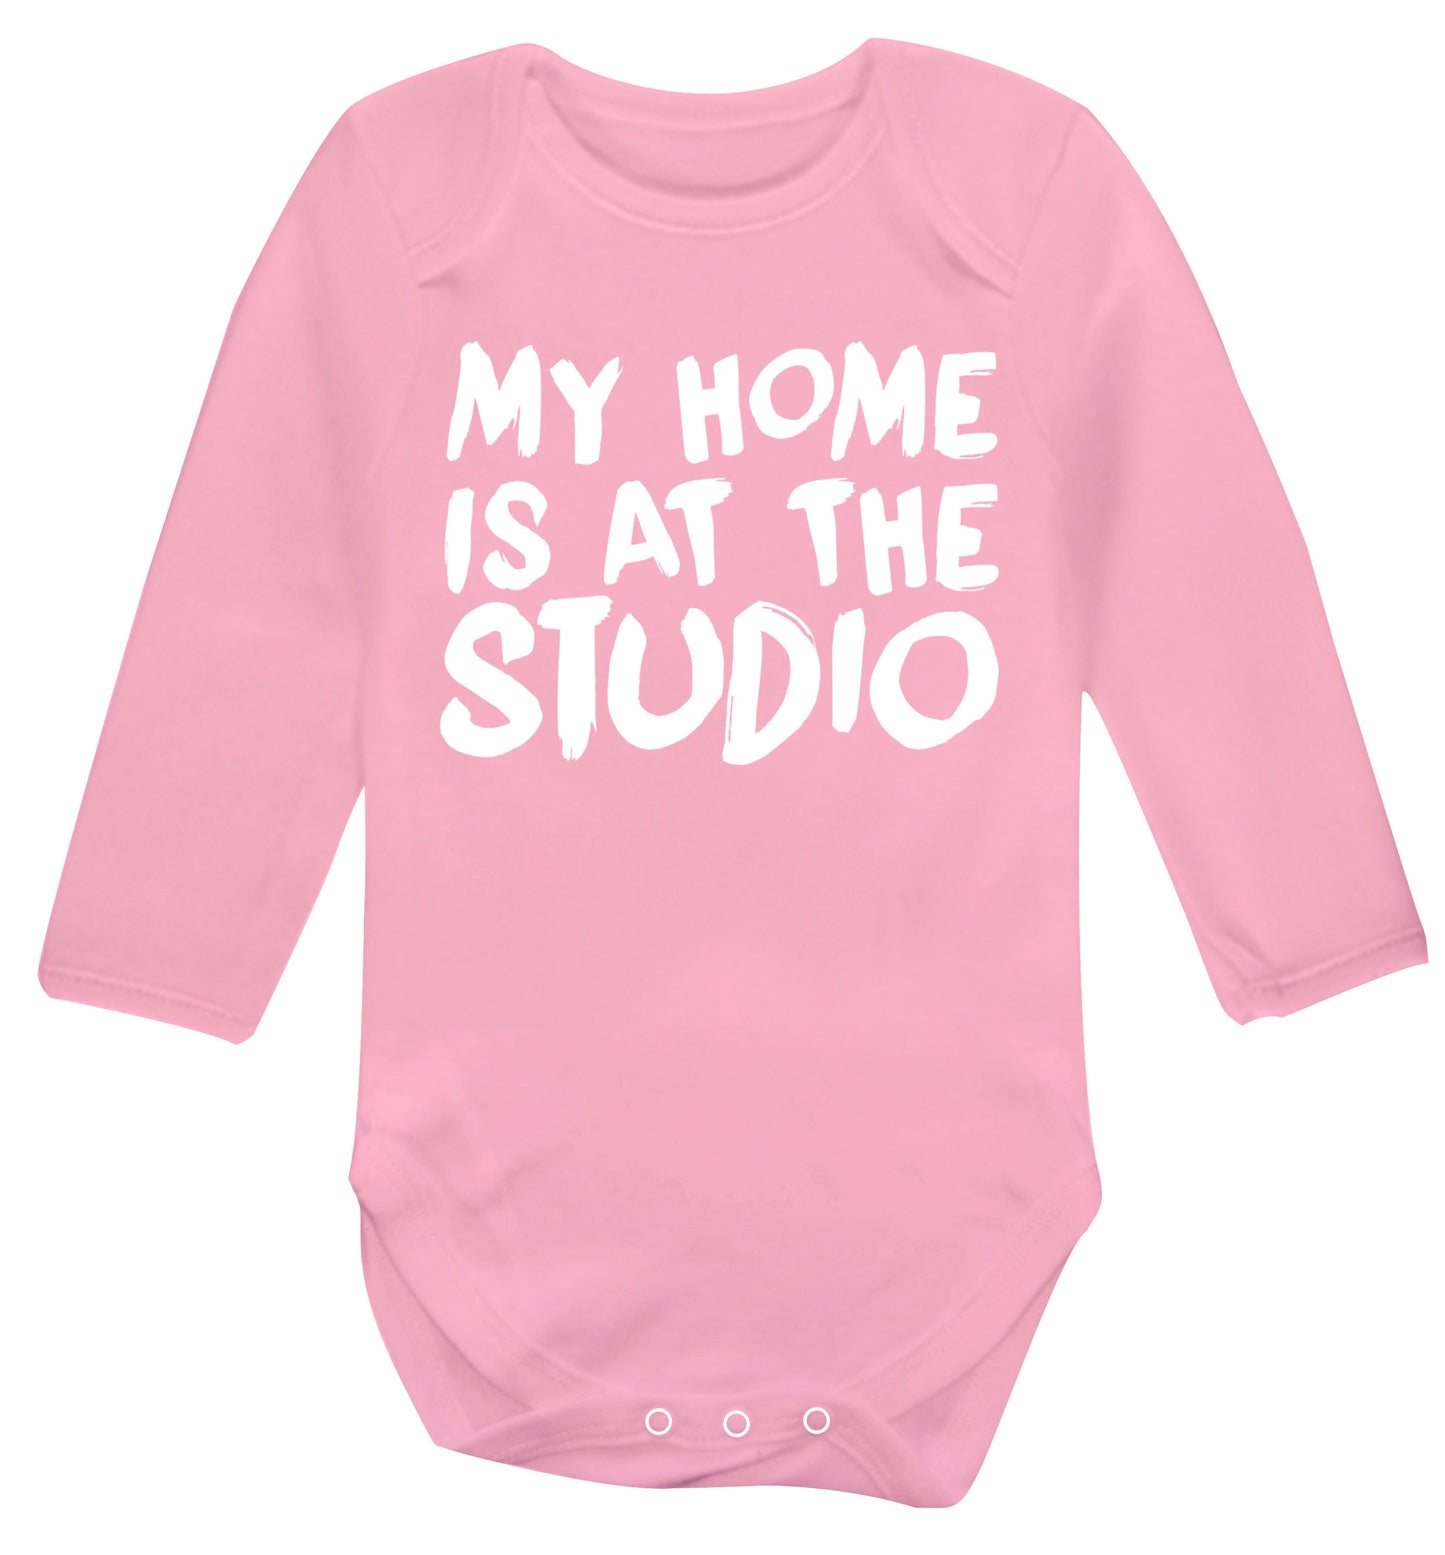 My home is at the studio Baby Vest long sleeved pale pink 6-12 months